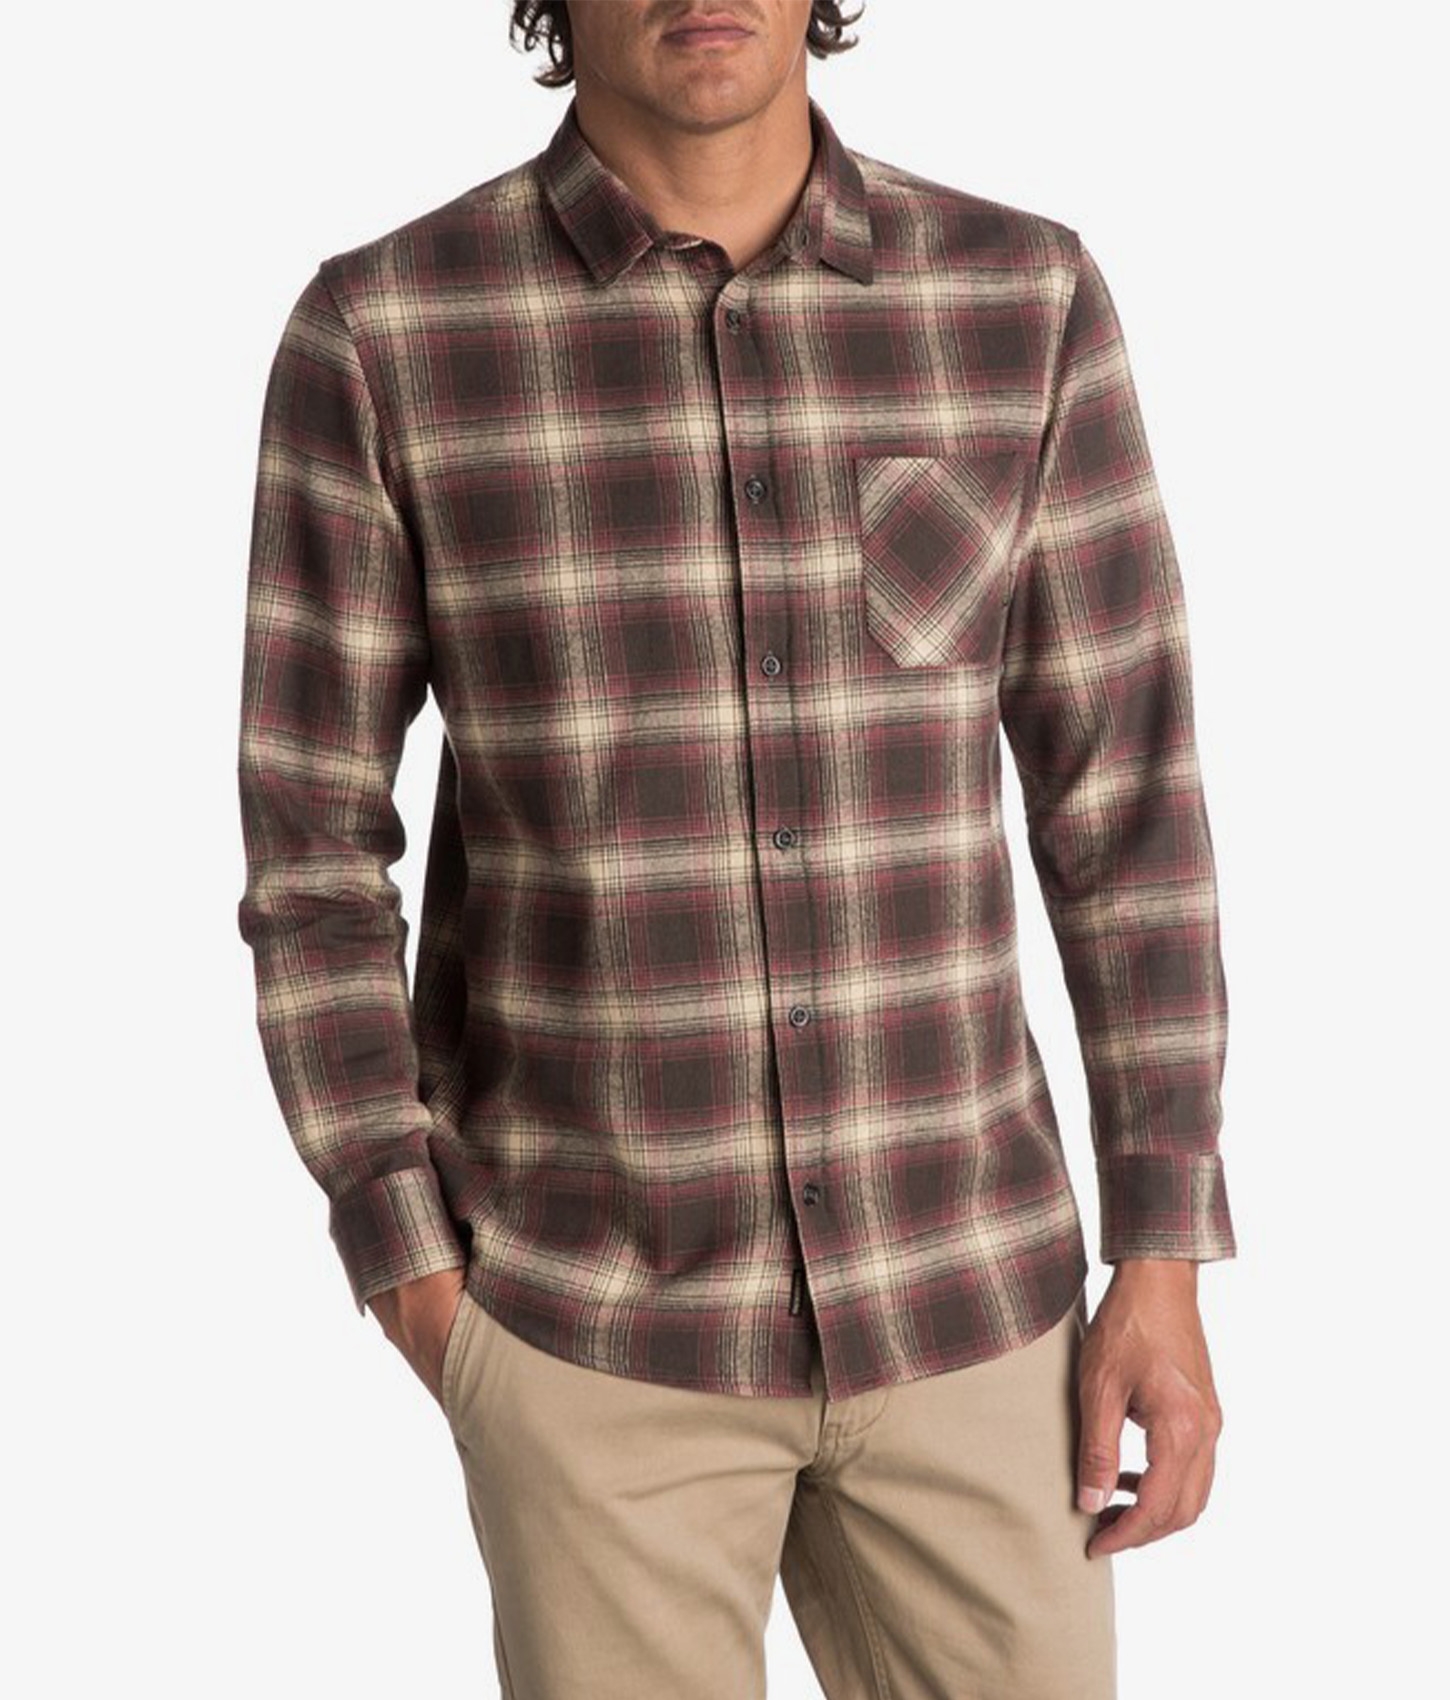 Fatherfly Flannel